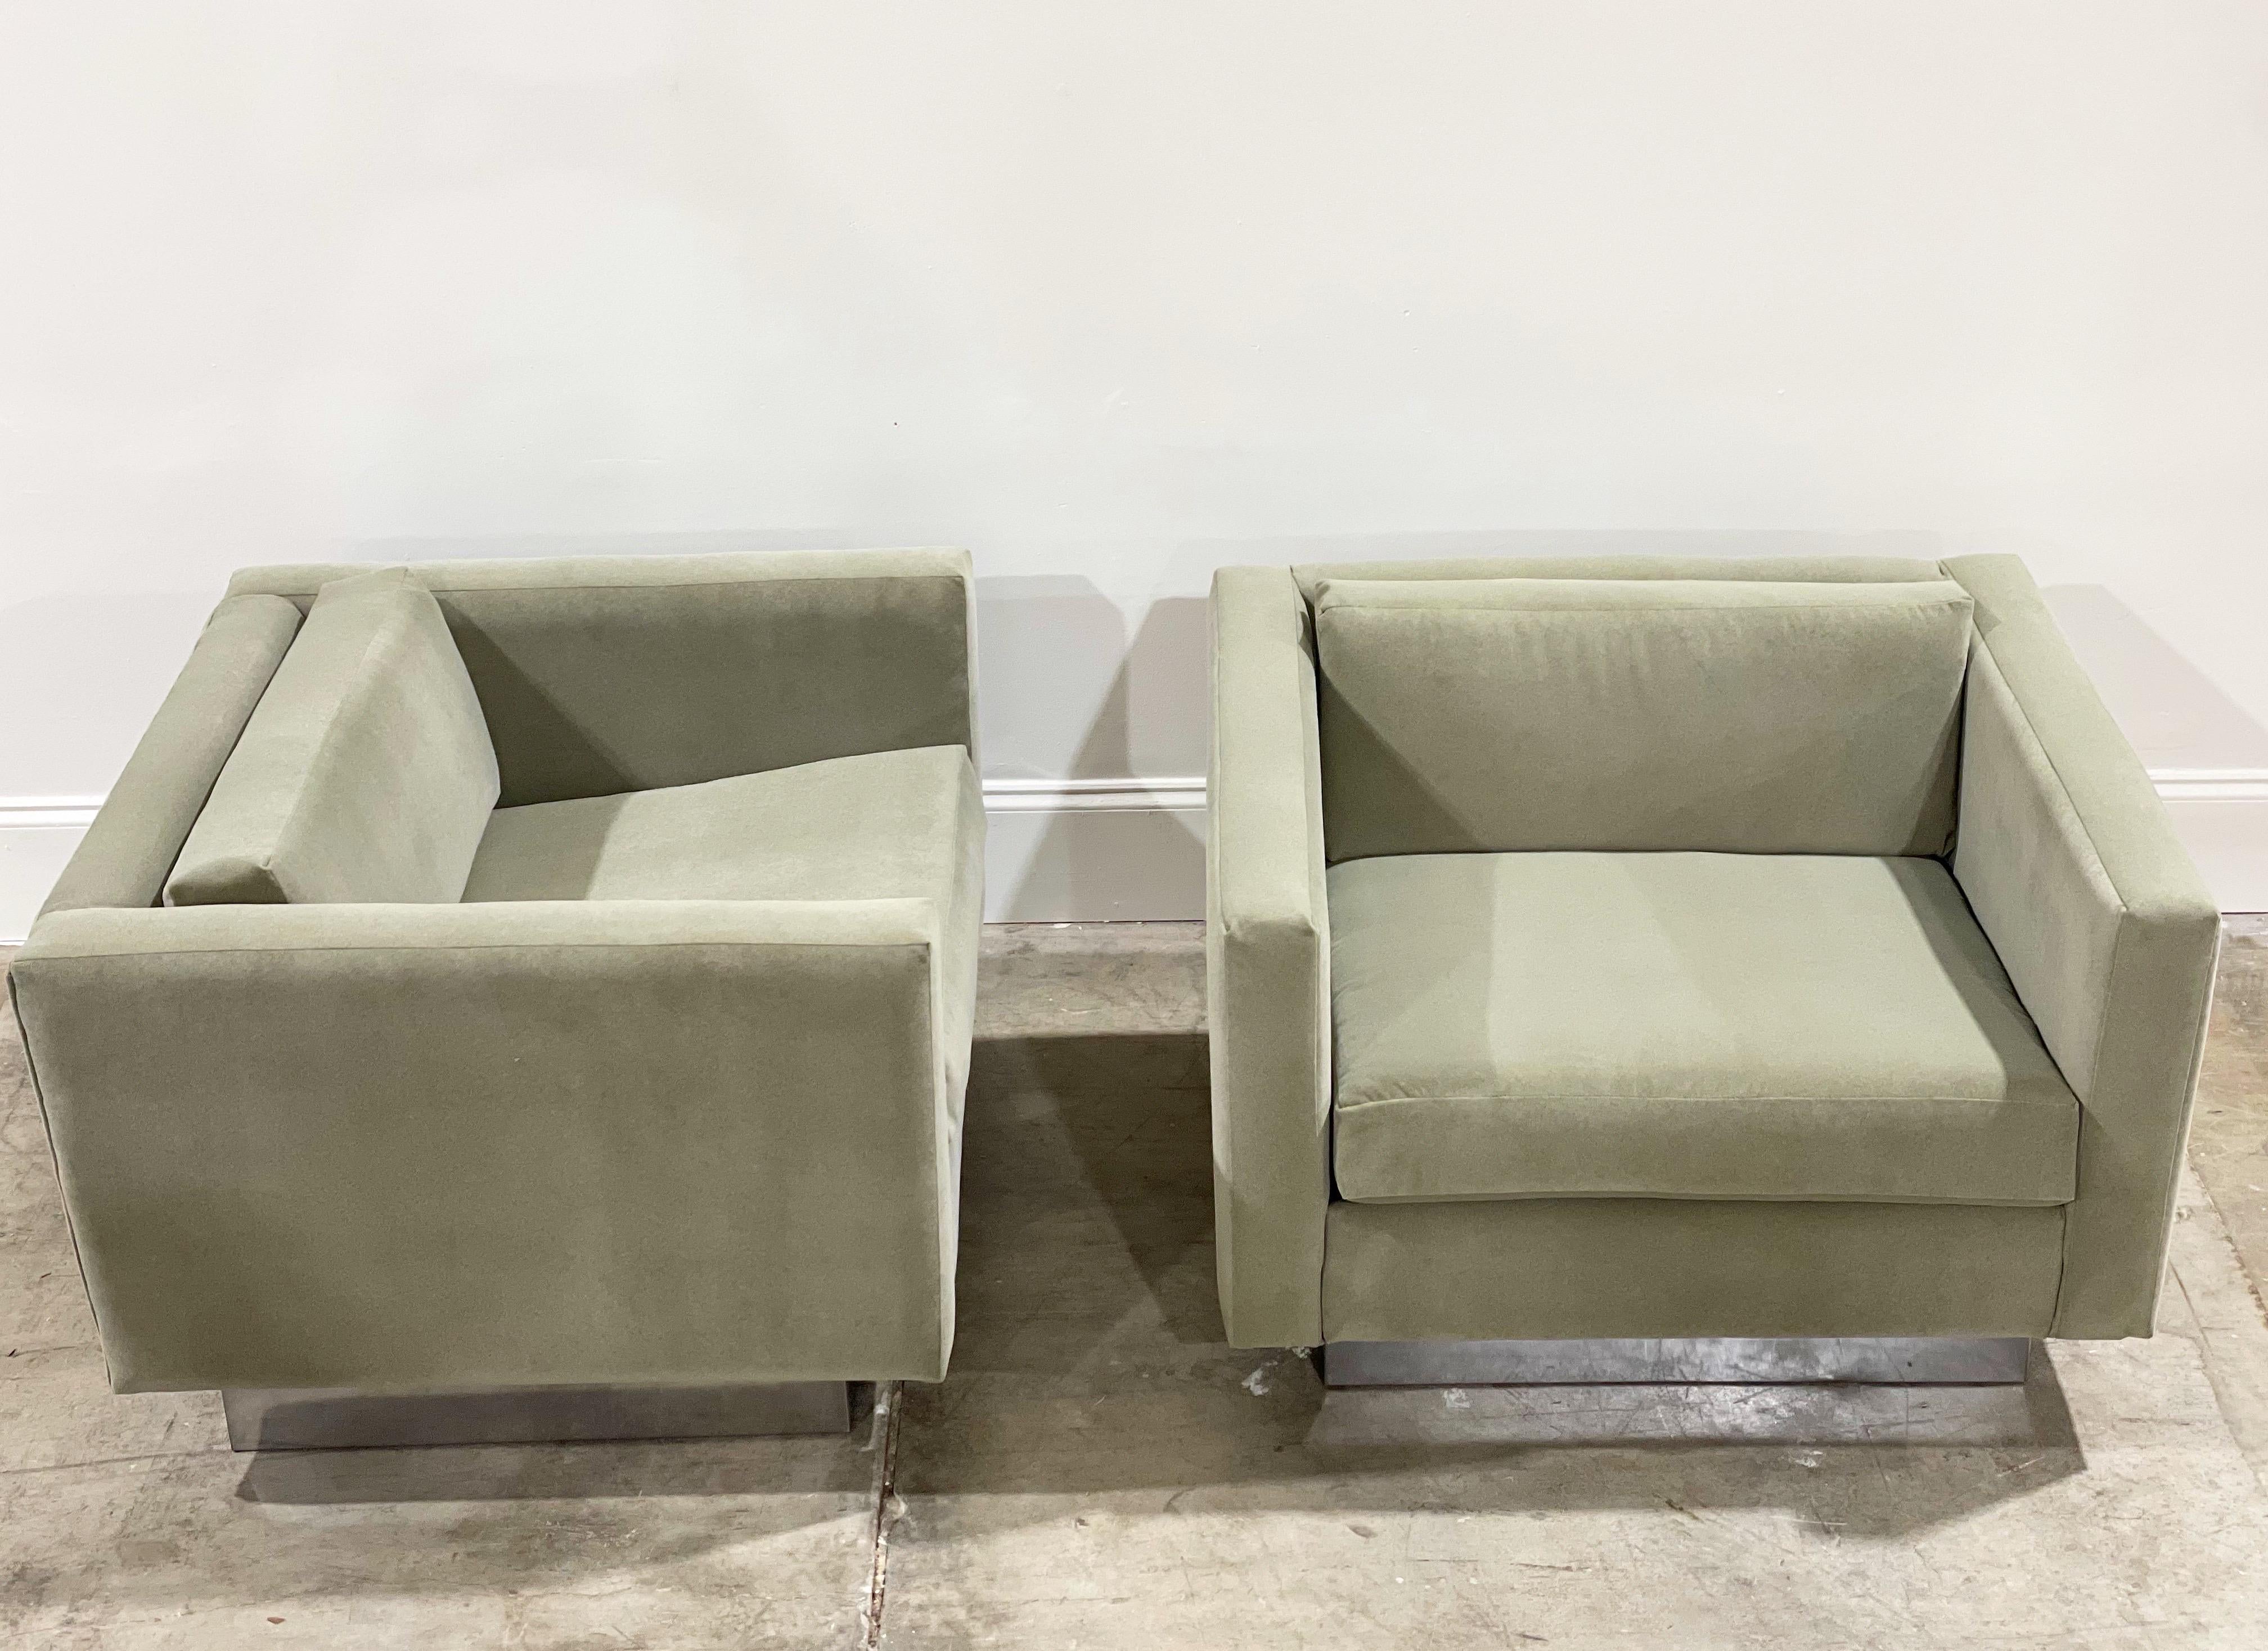 Pair Adrian Pearsall for Craft Associates Midcentury Cube Lounge Chairs 1